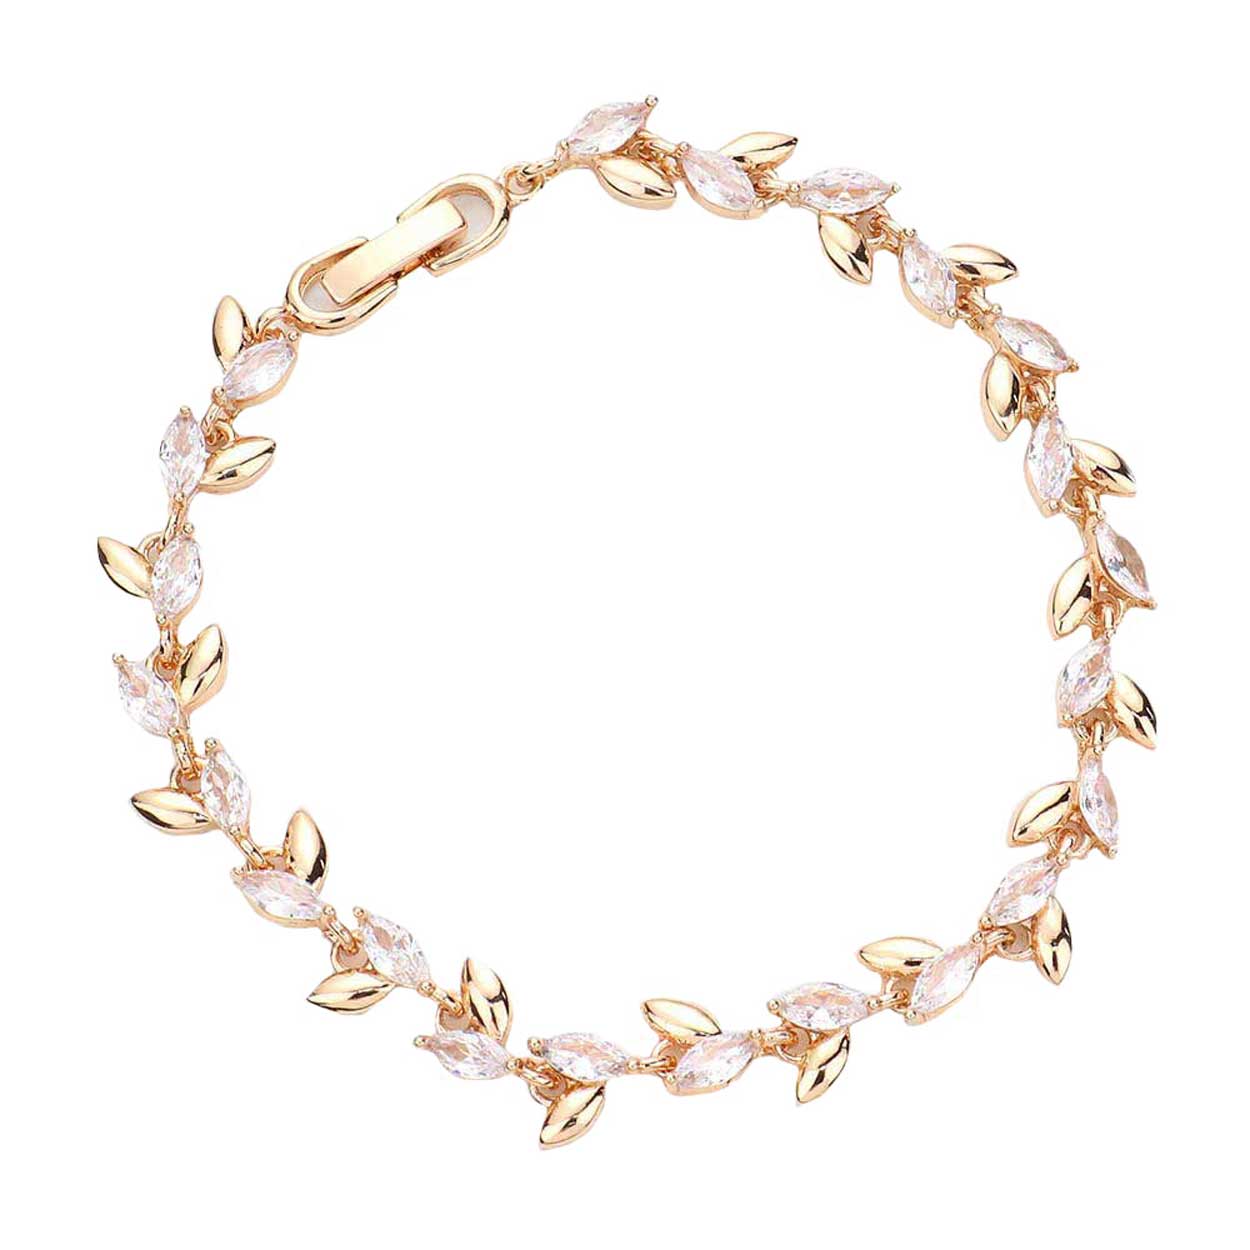 Gold CZ Metal Marquise Link Evening Bracelet. These Metal bracelets are easy to put on, take off and so comfortable for daily wear. Pair these with tee and jeans and you are good to go. It will be your new favorite go-to accessory. Perfect Birthday gift, friendship day, Mother's Day, Graduation Gift.